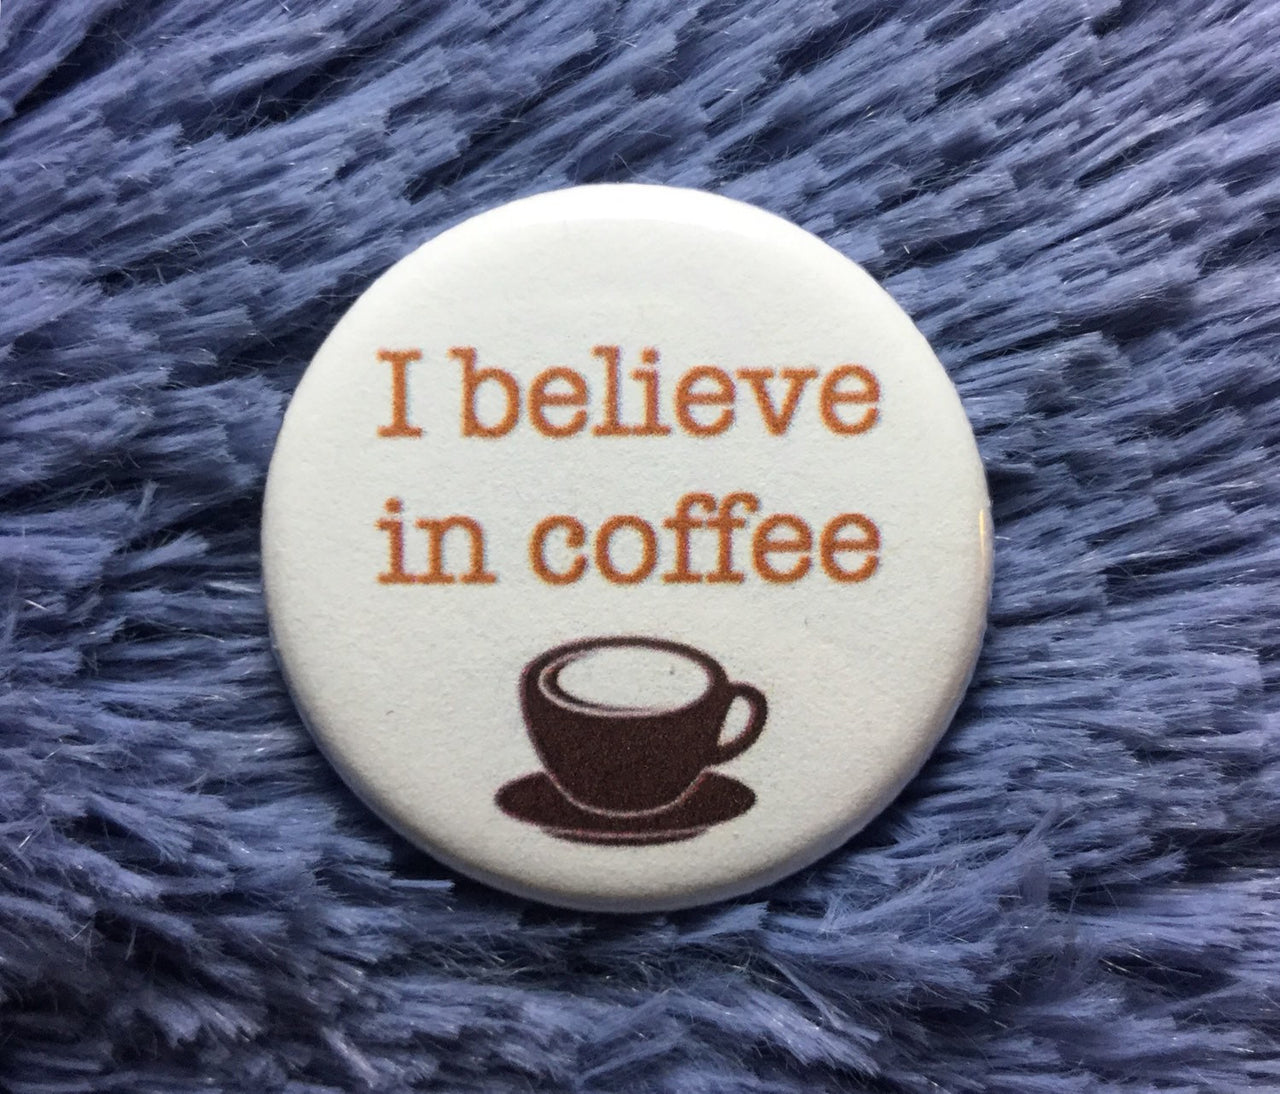 I believe in coffee - Radical Buttons